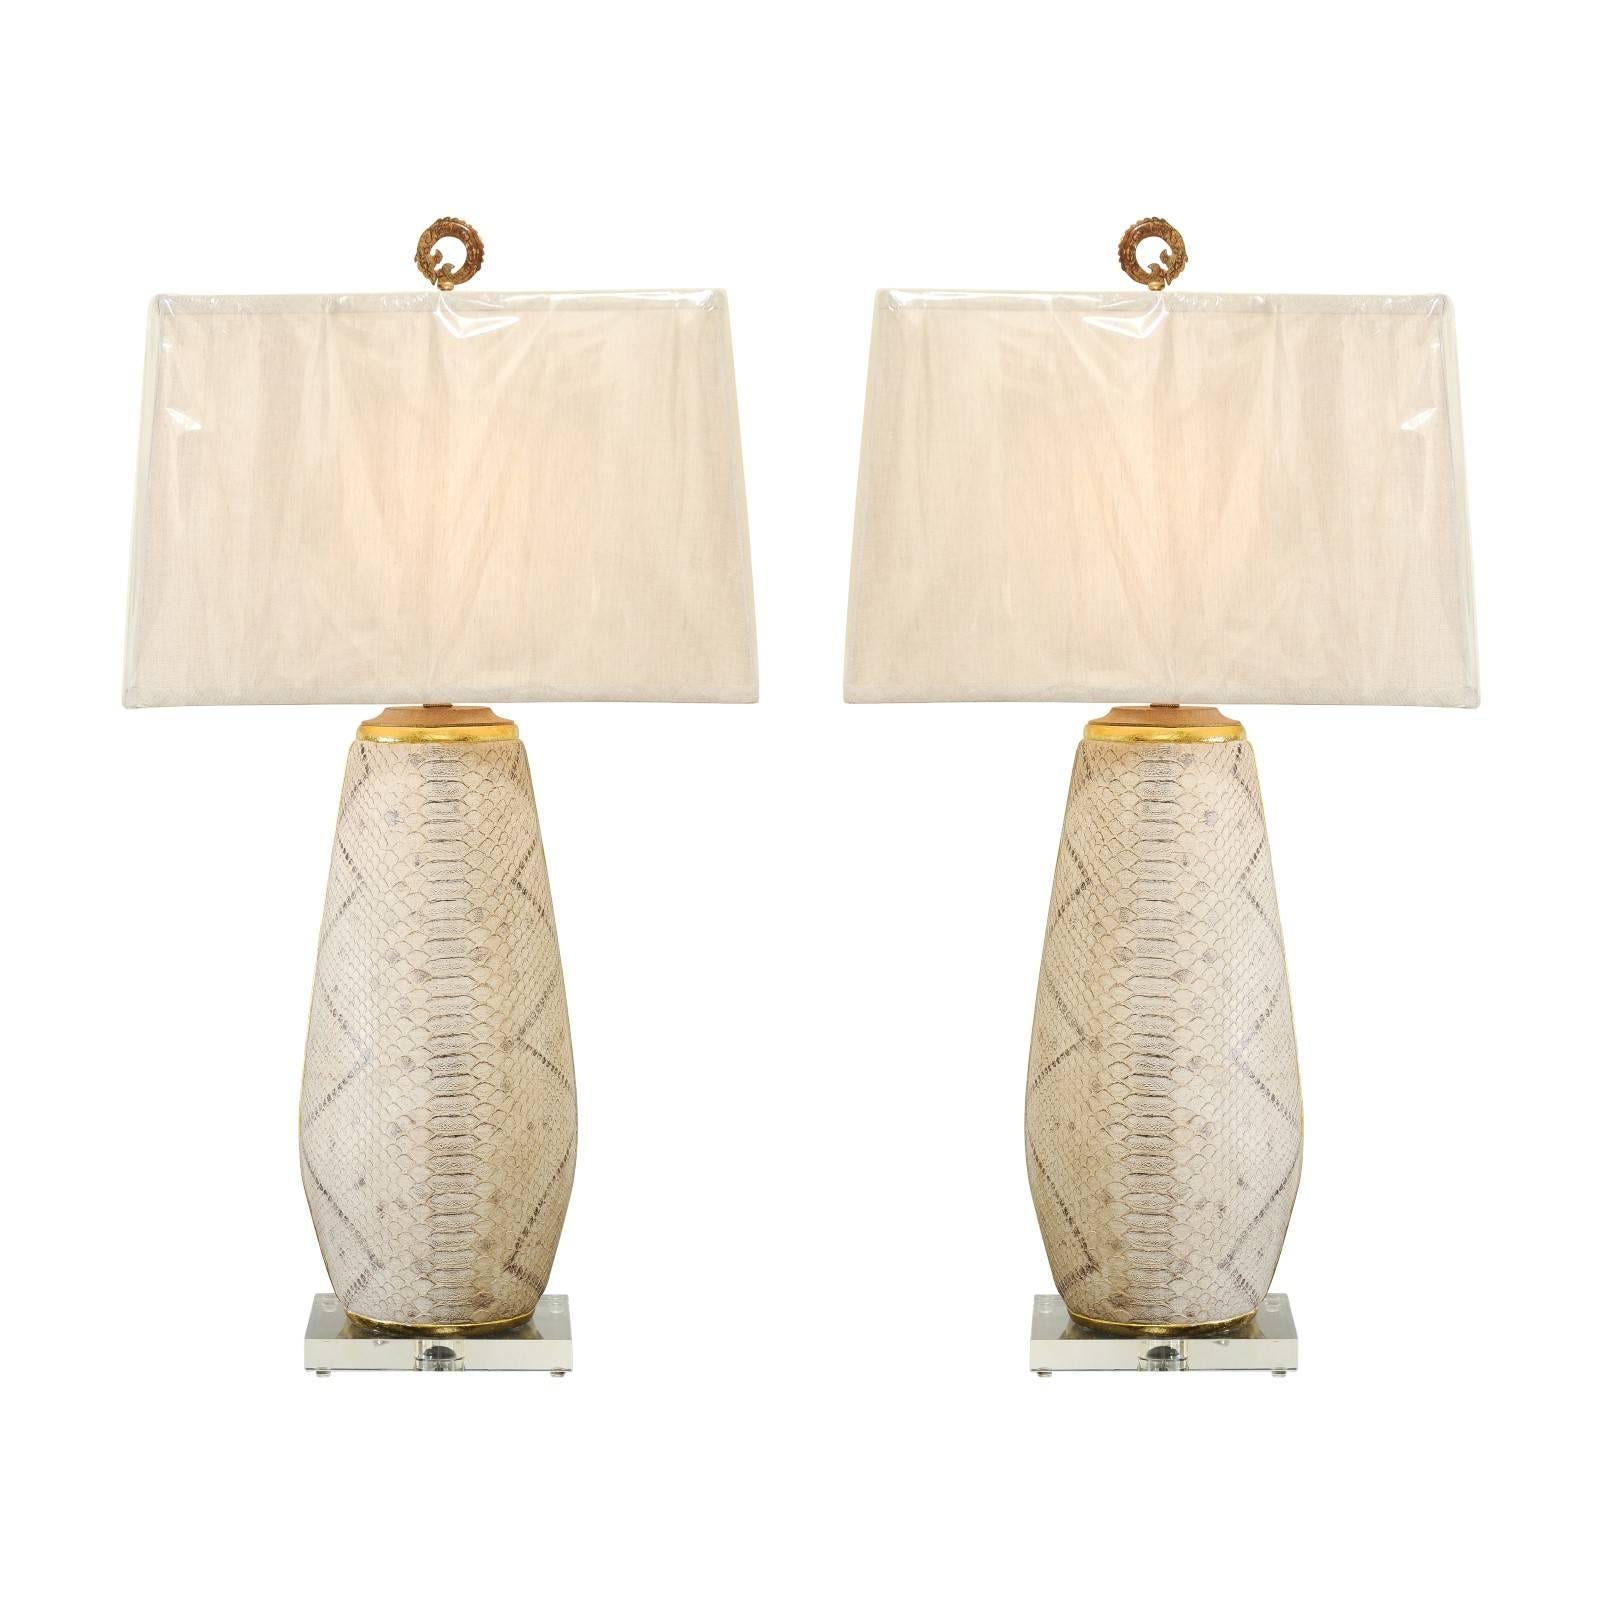 Outstanding Pair of Faux-Snakeskin Vessels and Custom Lamps